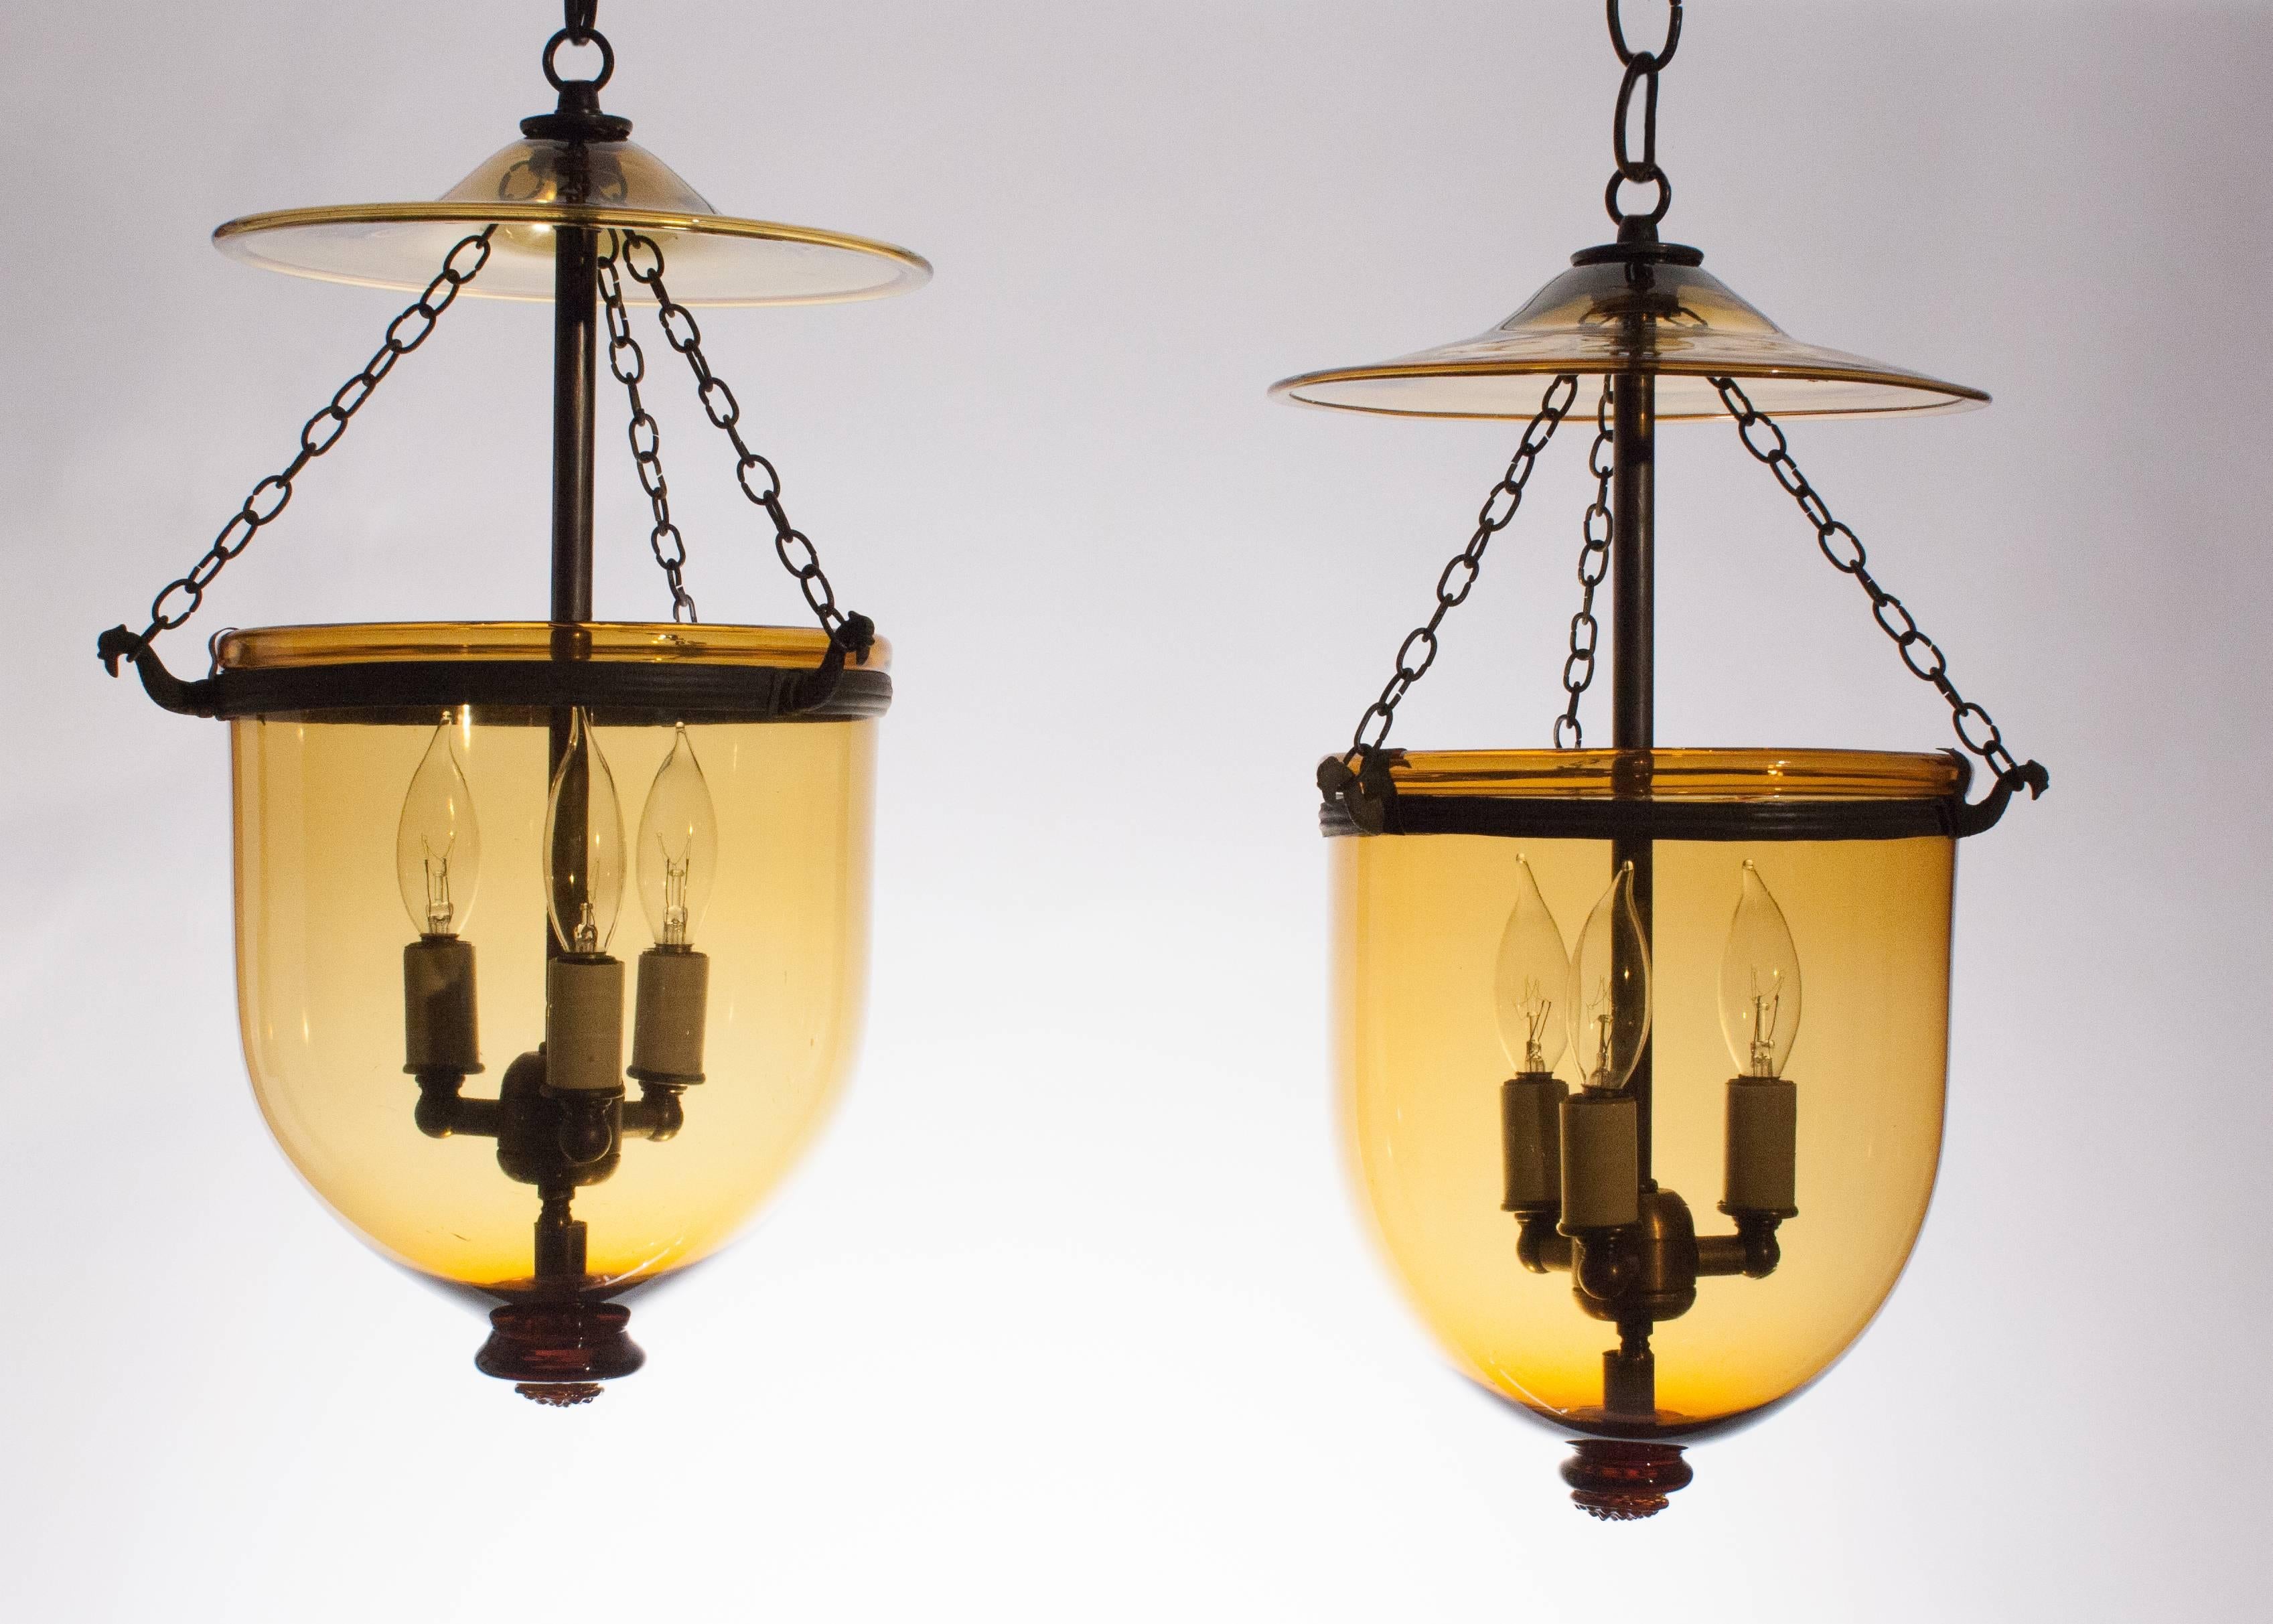 An exceptional pair of 19th century amber colored glass bell jar lanterns. These English hall lanterns emanate a warm, honeyed hue. A sprinkling of small air bubbles speak to the quality and age of the handblown glass. The bell jars are in excellent